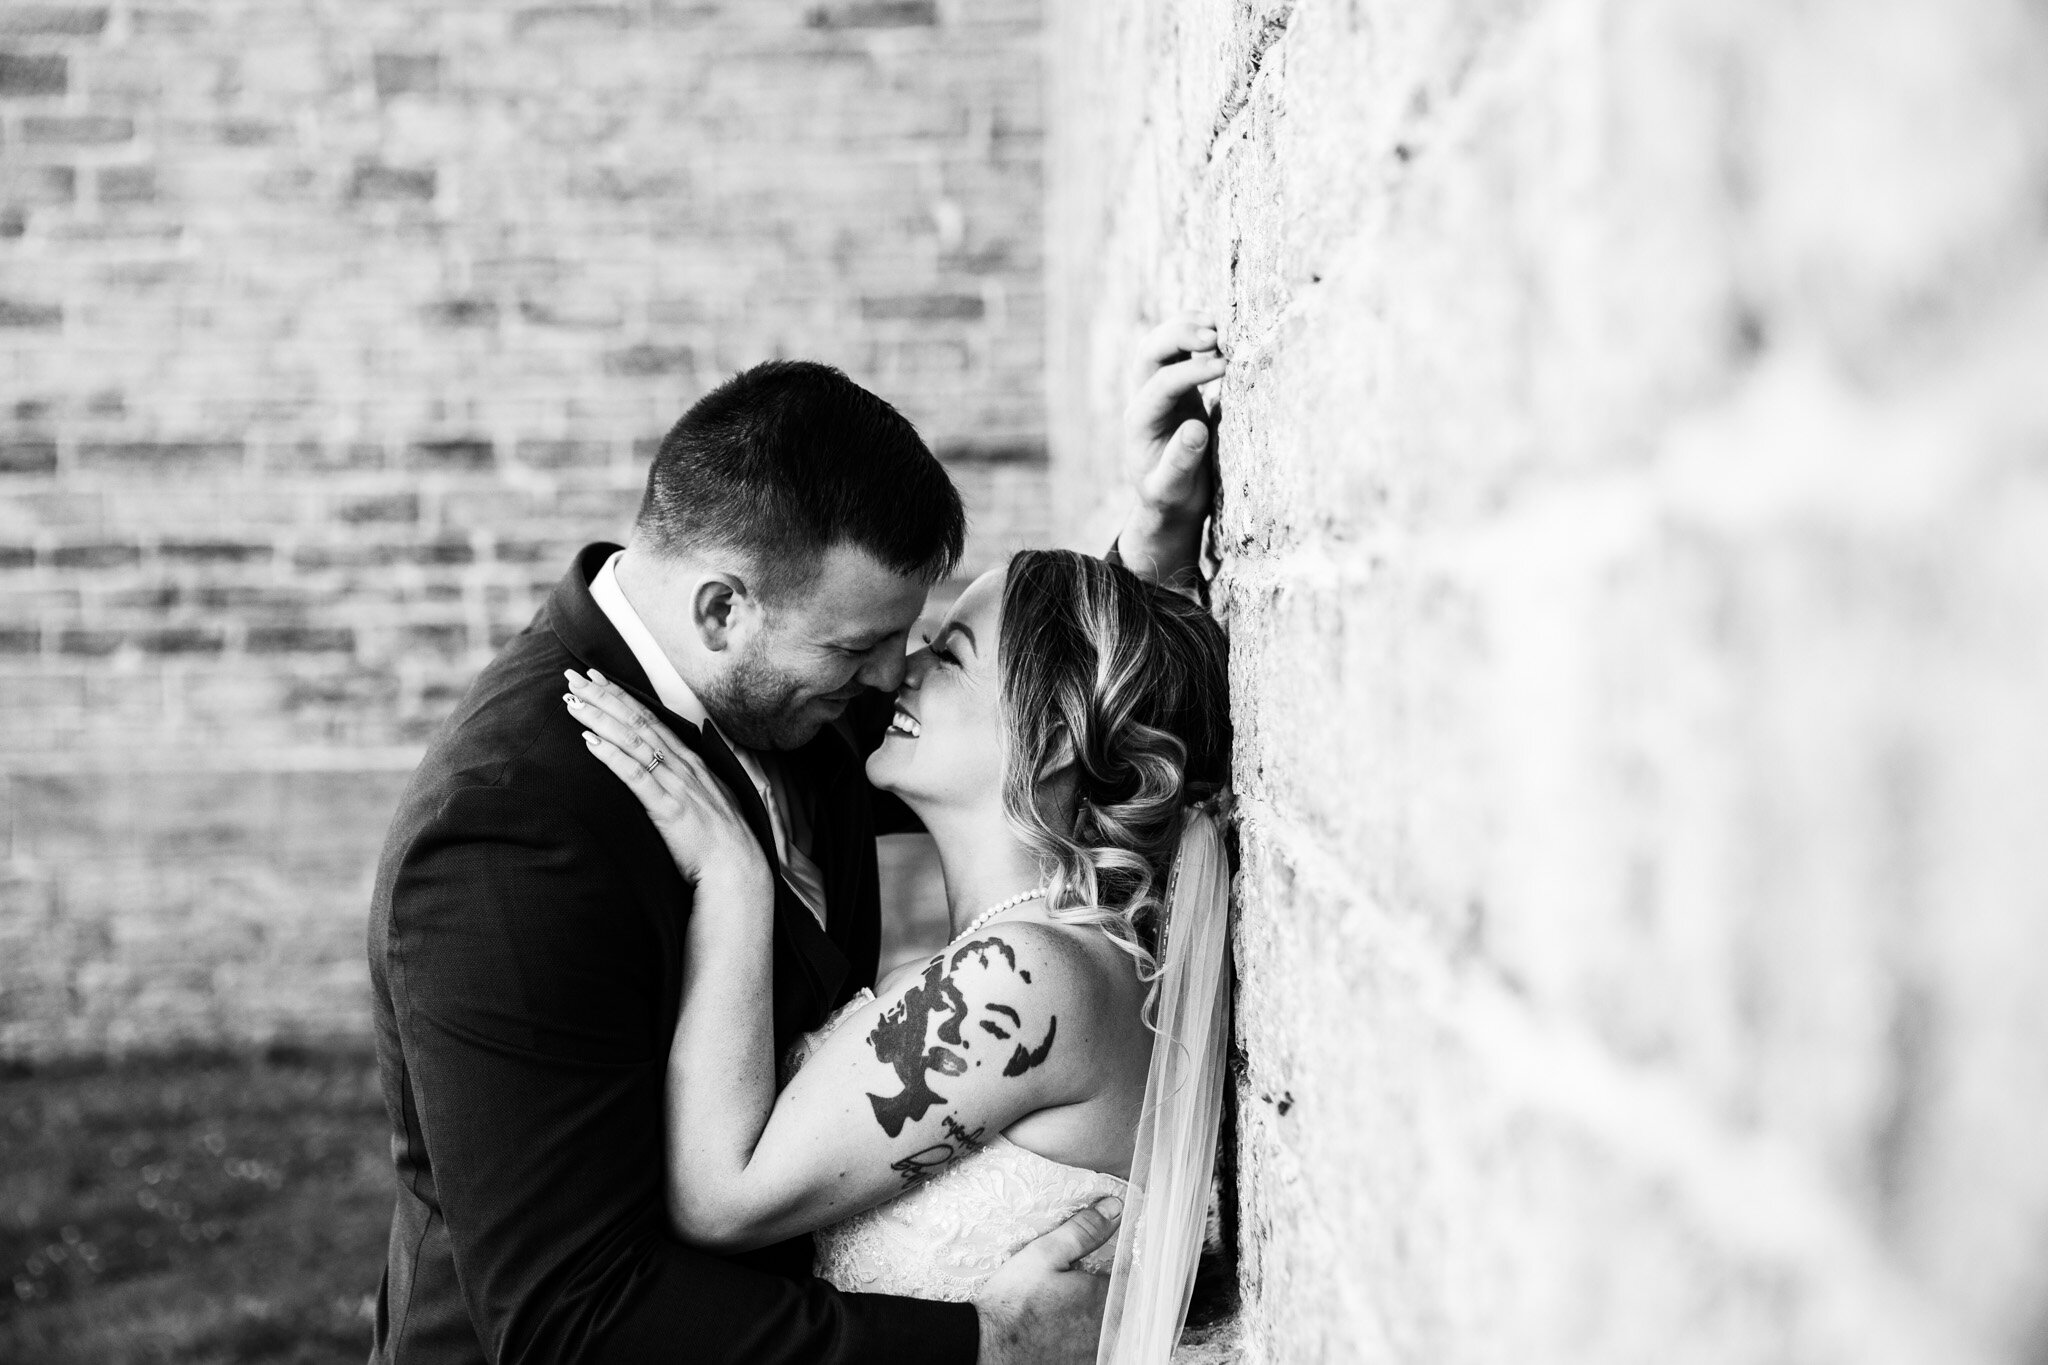 tattooed bride and groom about to kiss leaning against stone wall at St Raphael's ruins in black and white.jpg